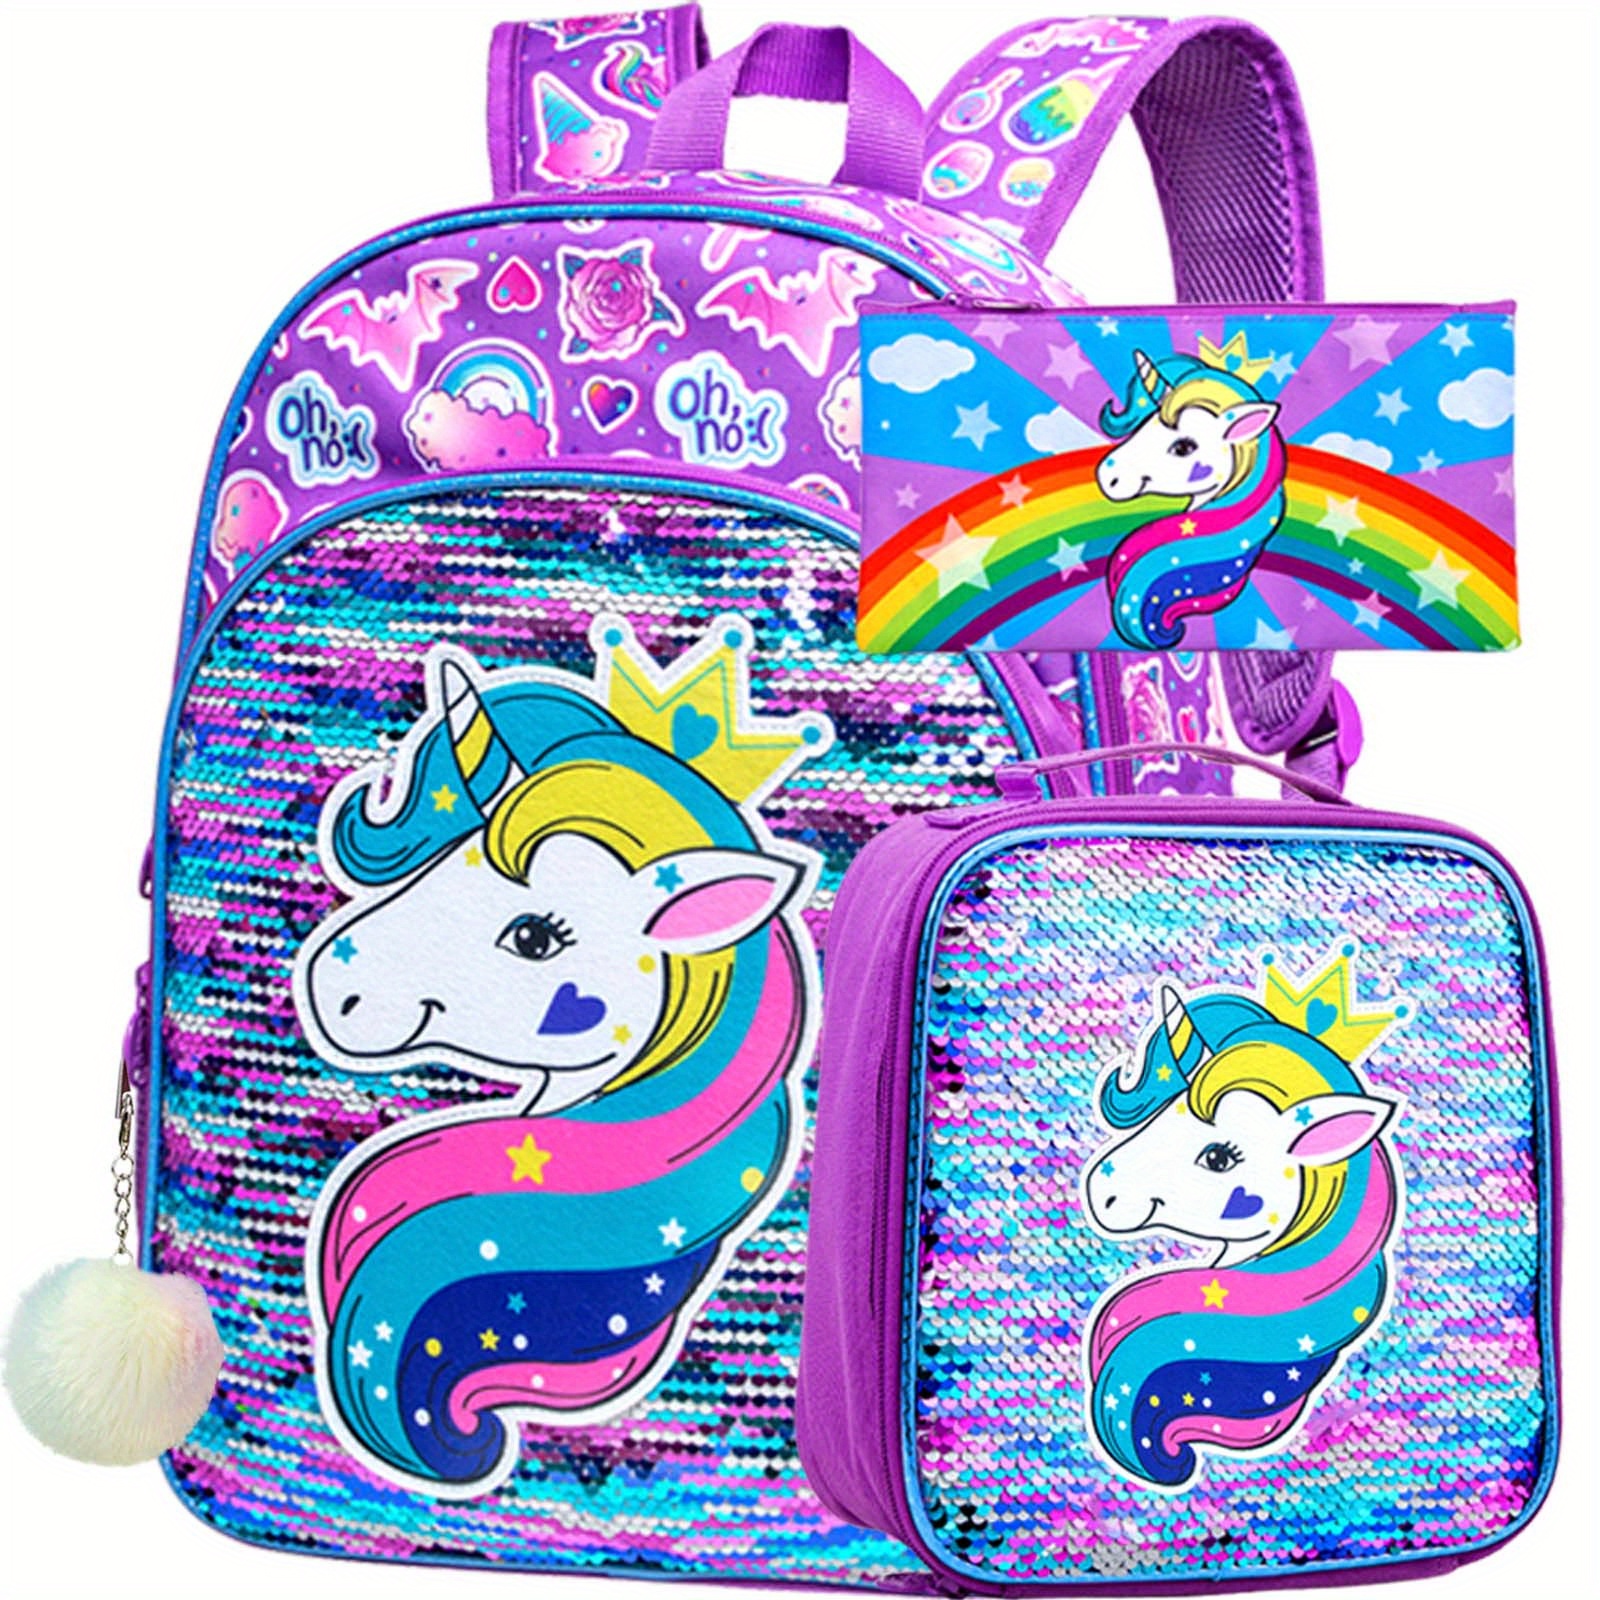 Cute Unicorn Lunch Box With Your Name for School and Kindergarten 